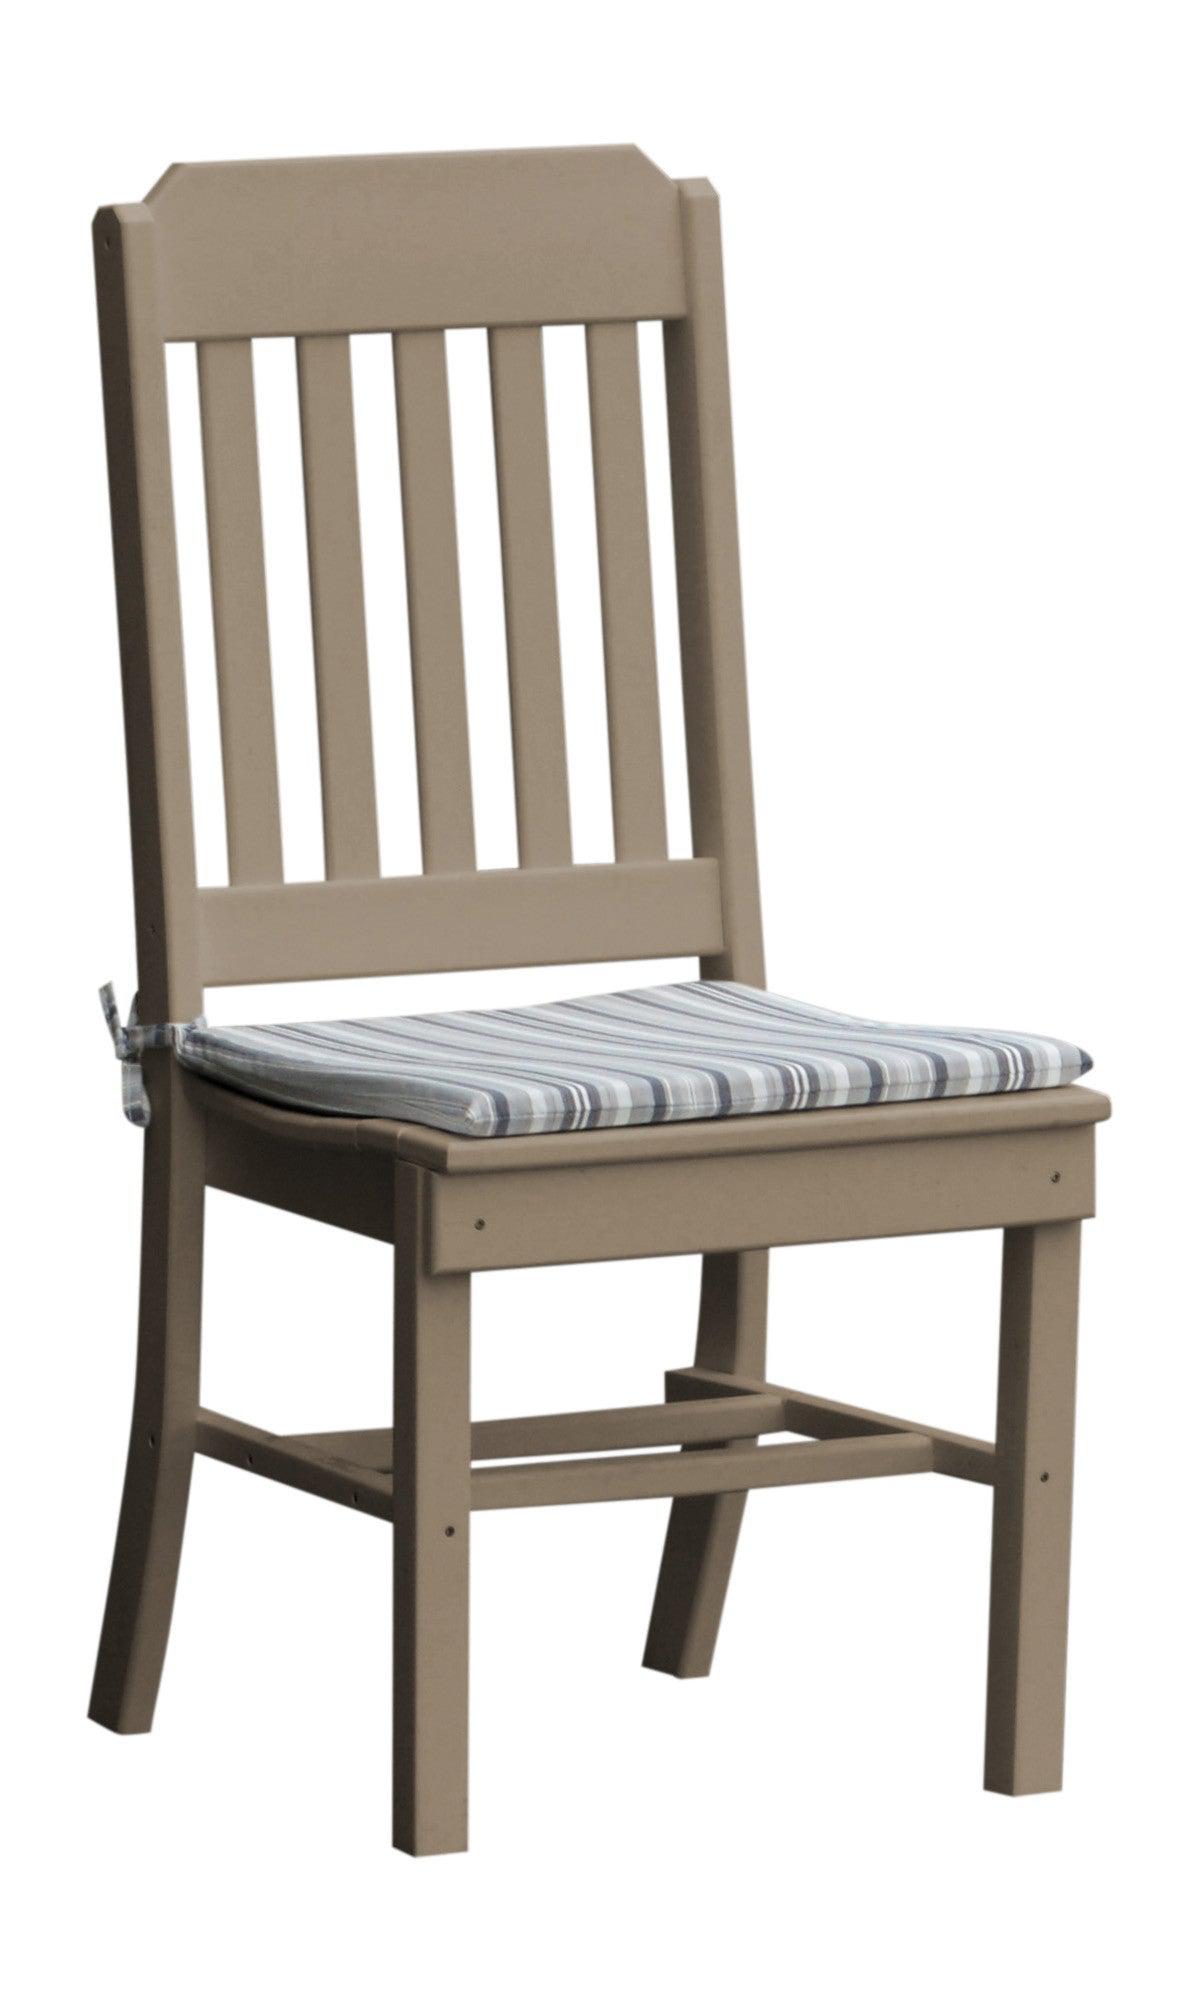 A&L Furniture Company Recycled Plastic Traditional Dining Chair - Weatheredwood